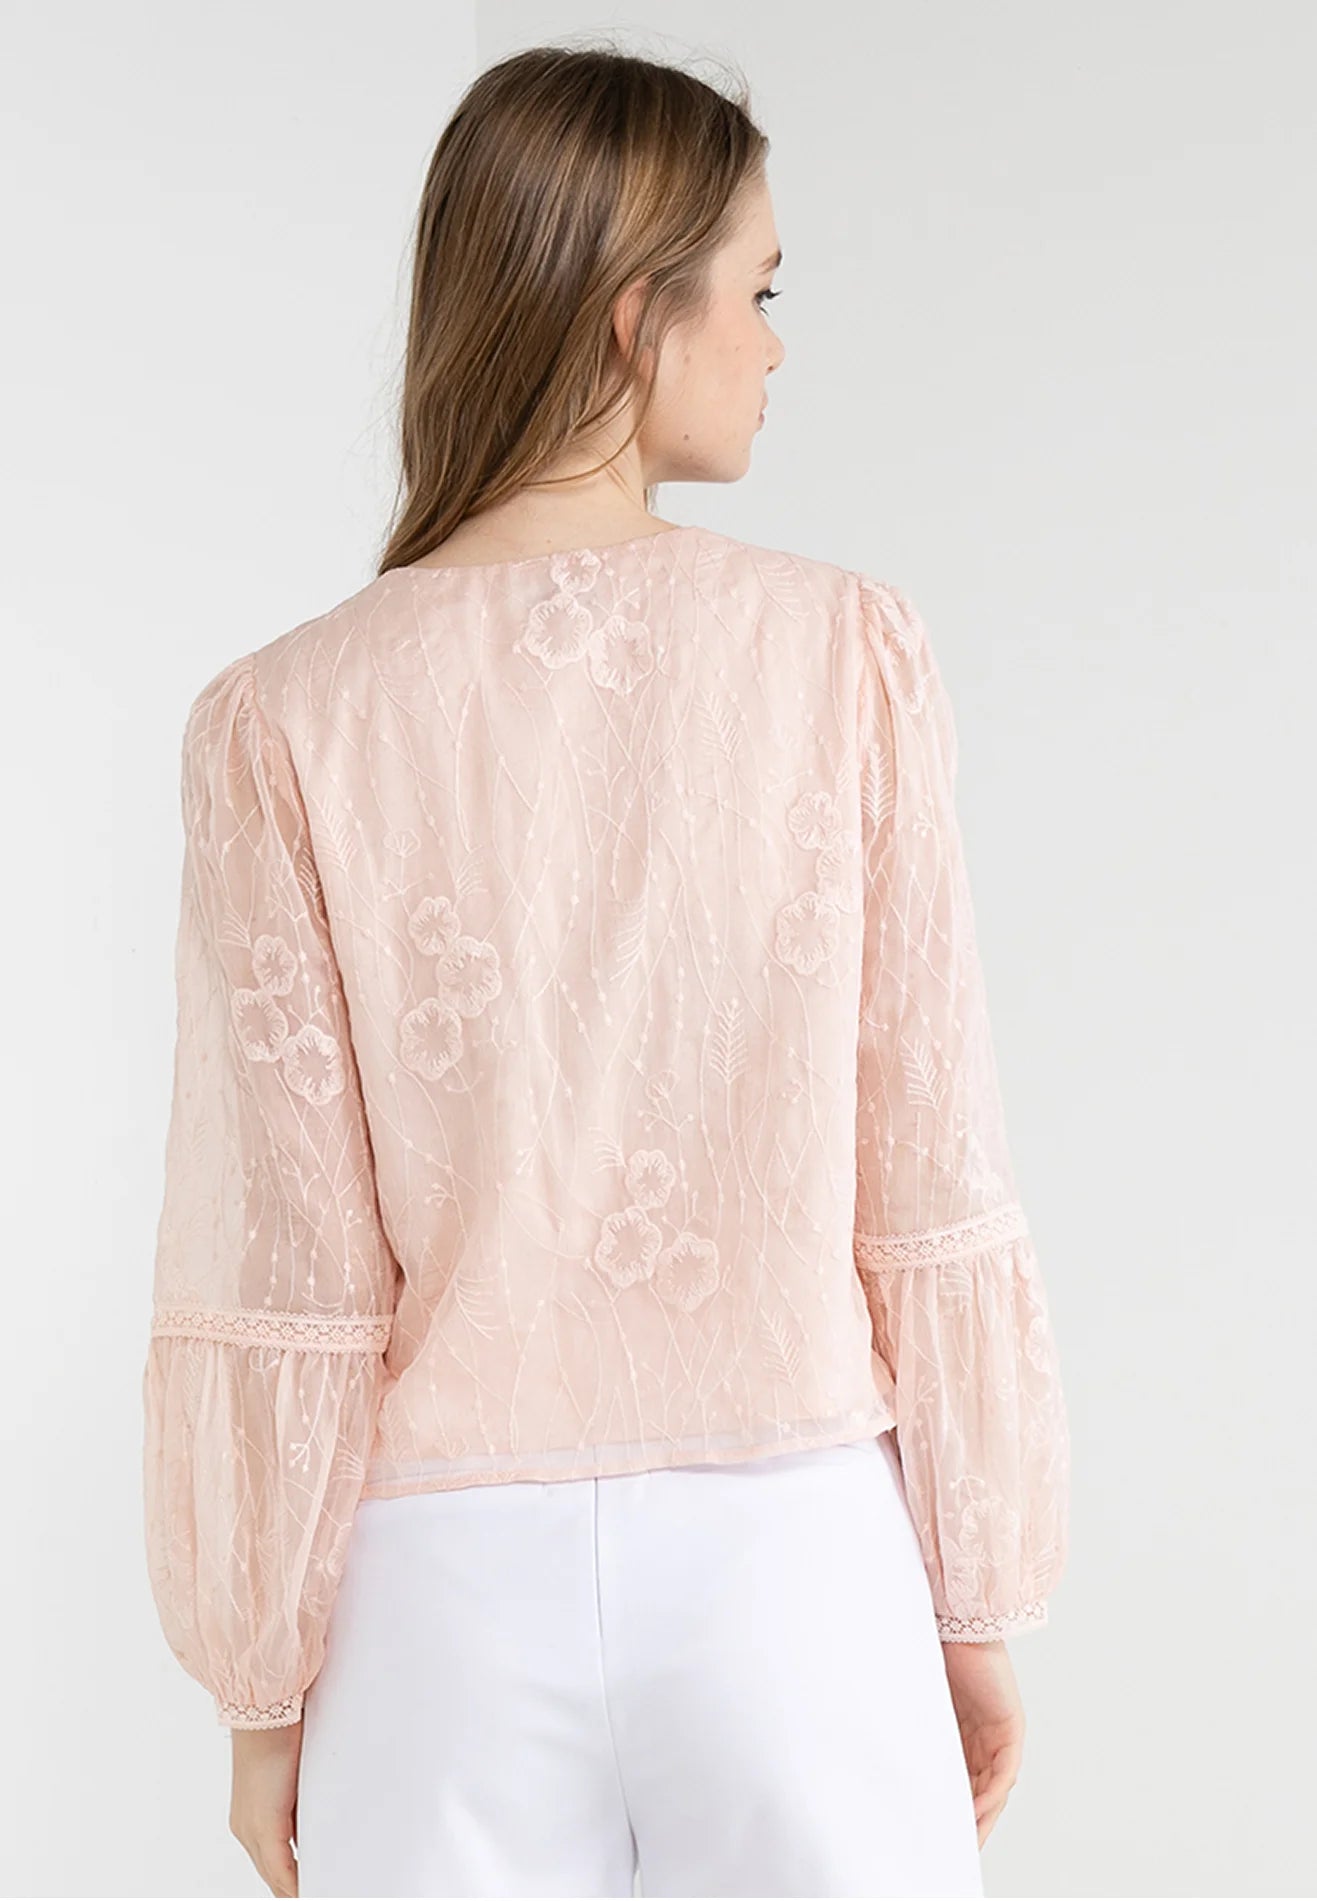 ELLE Apparel Blossom Lace Long Sleeves Button Blouse